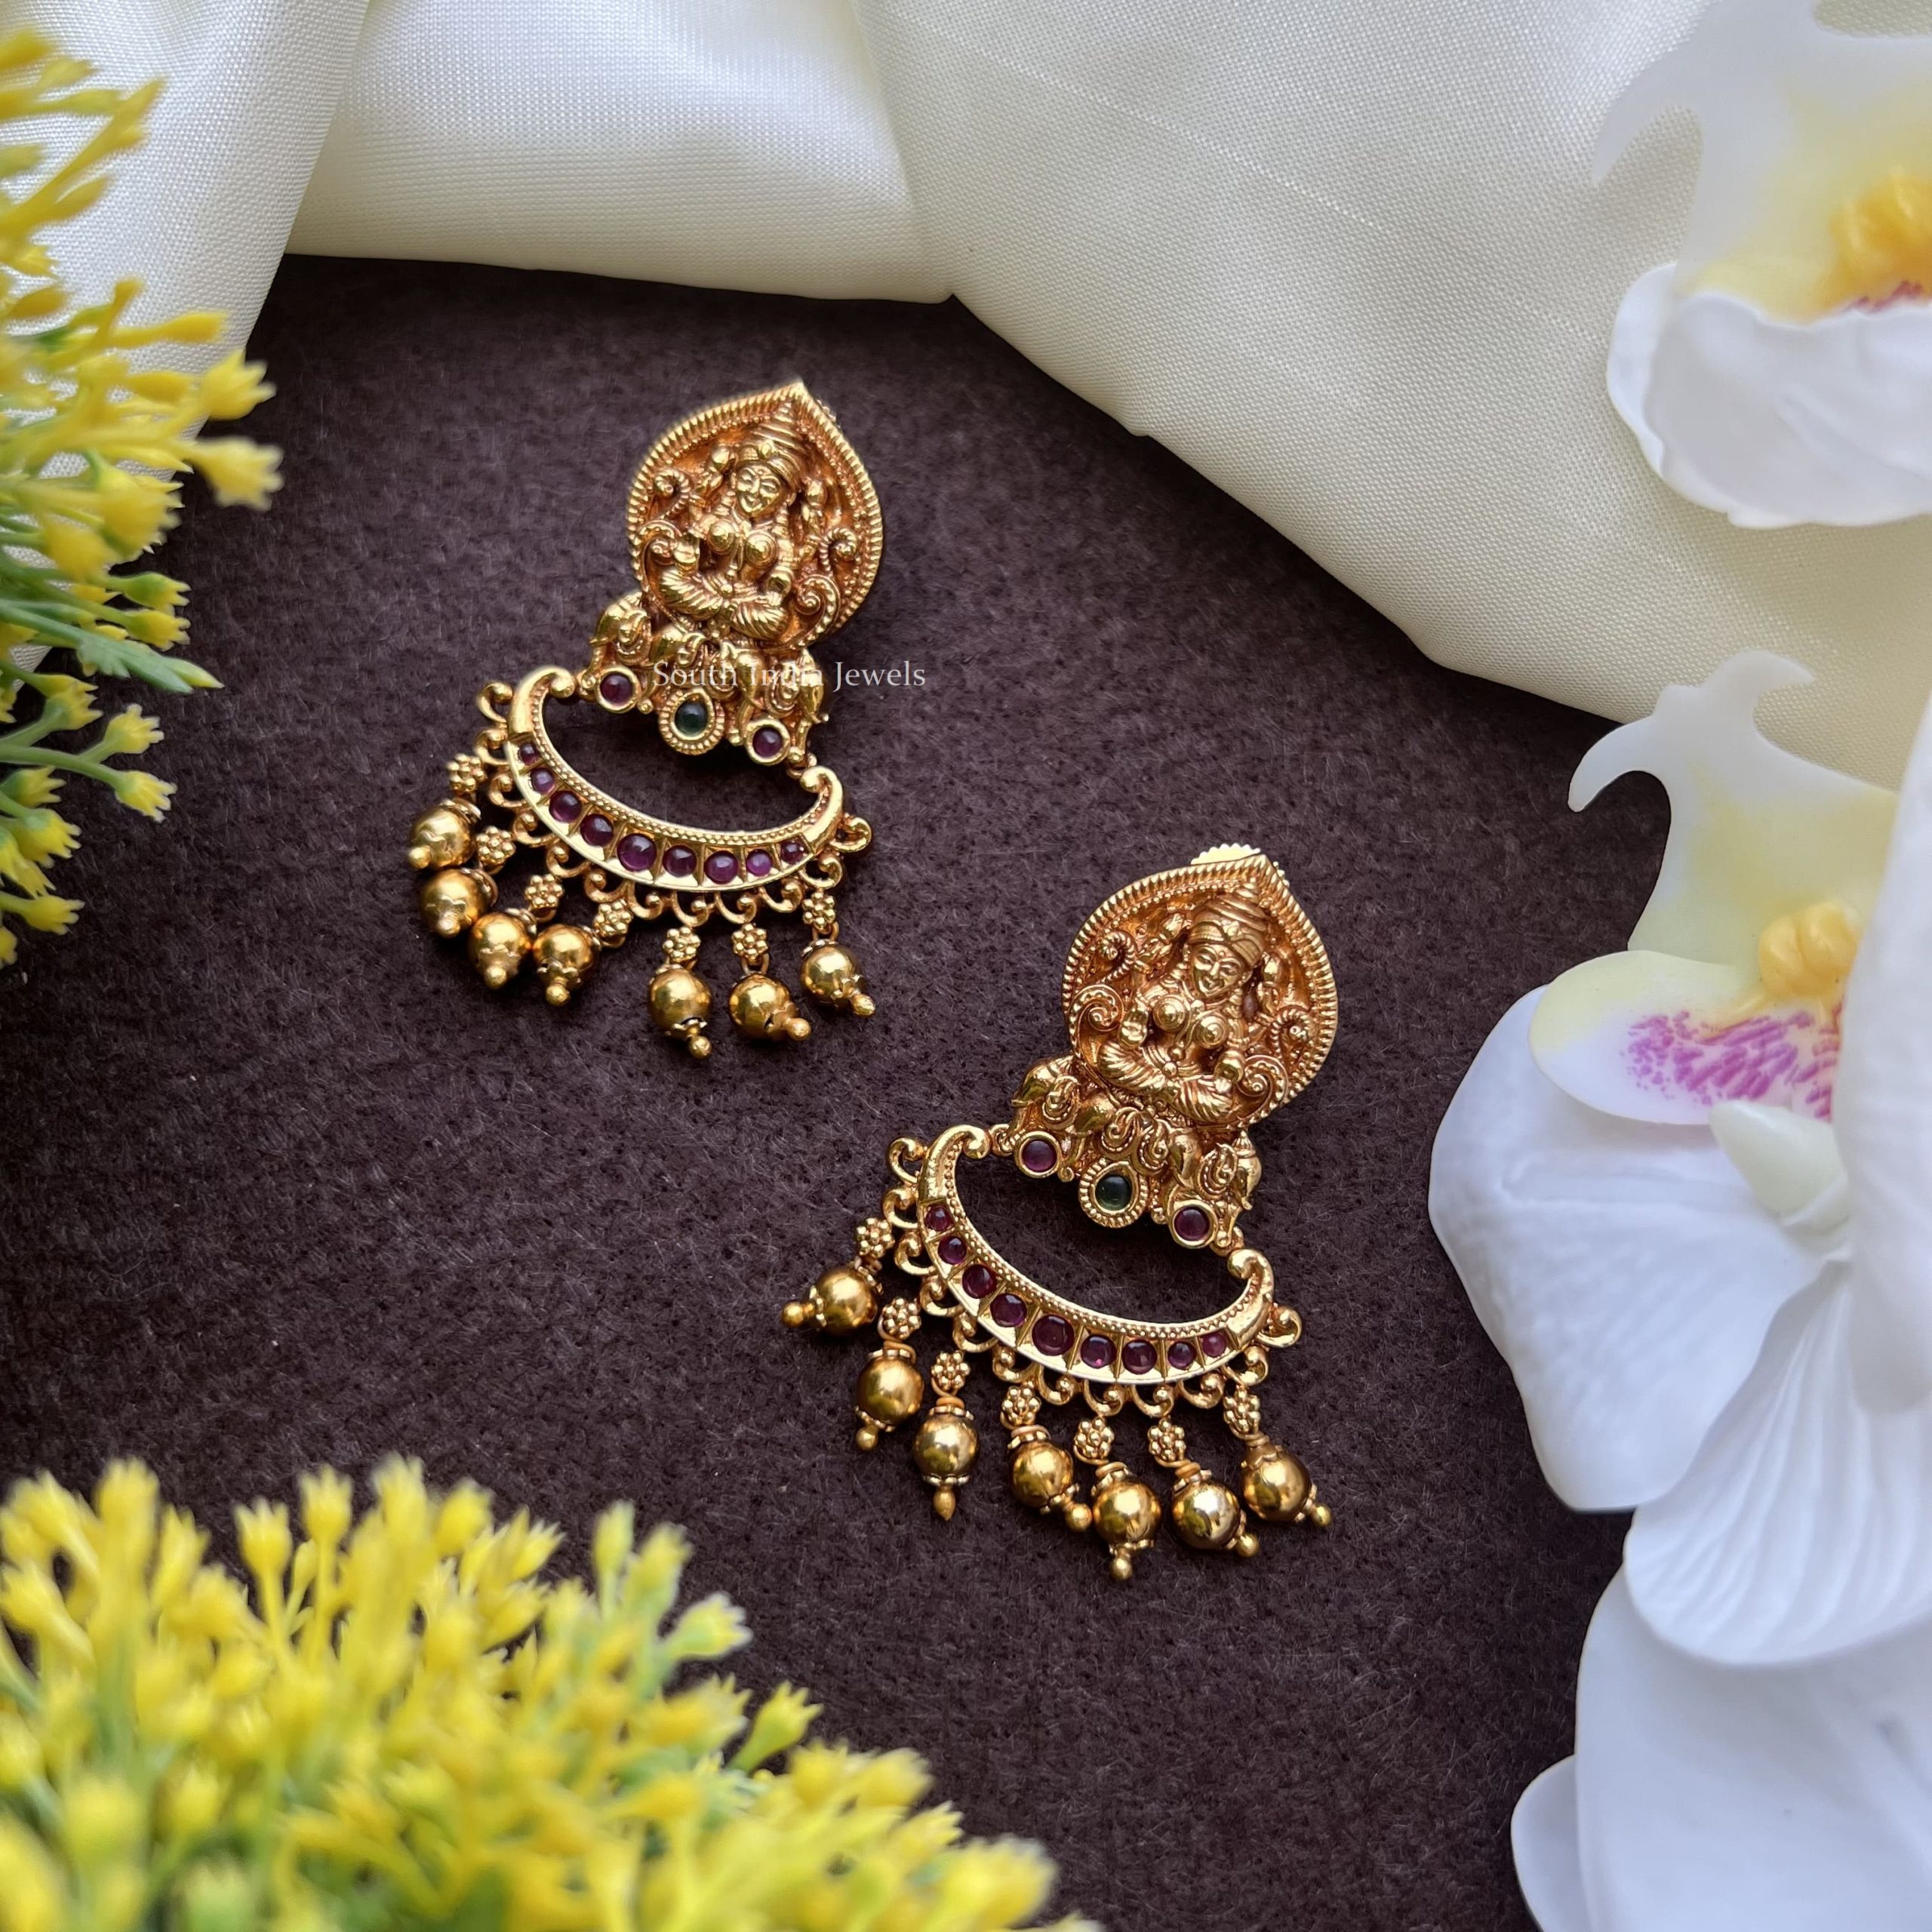 Lakshmi Gold Beads Earrings Designs - South India Jewels Stores Online